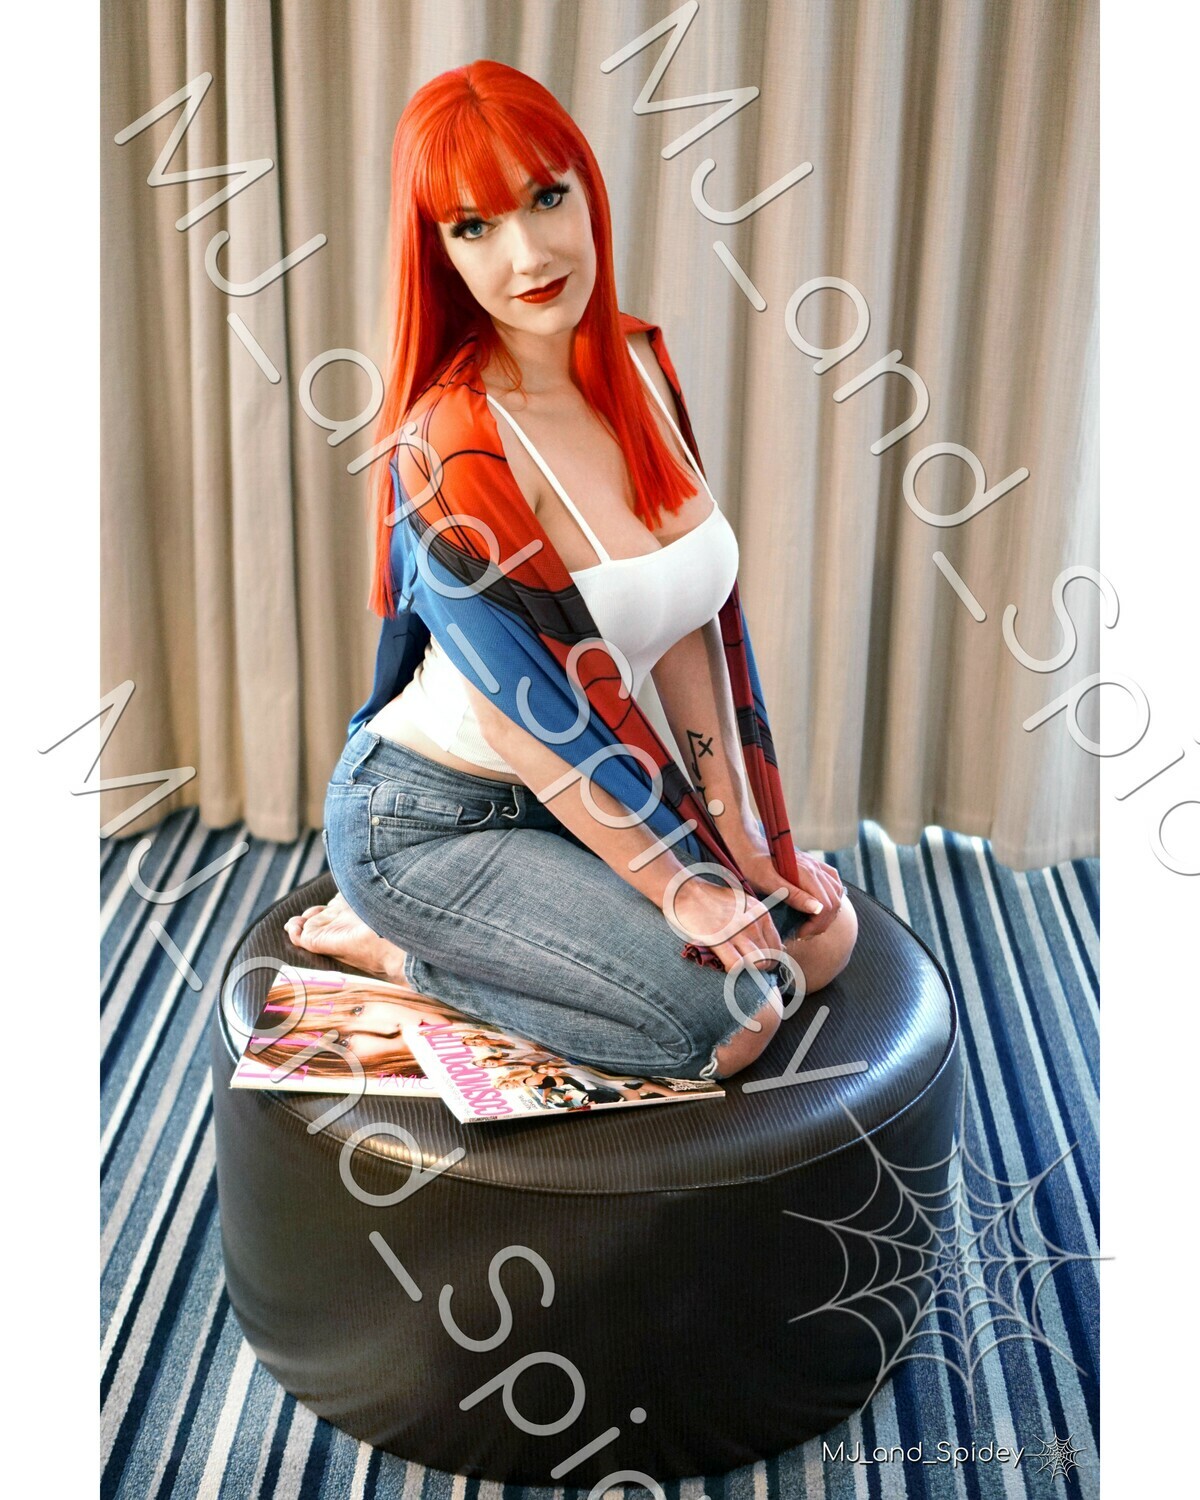 Marvel - Spider-Man - Mary Jane Watson - Campbell 1 - Digital Cosplay Image (@MJ_and_Spidey, MJ and Spidey, Comics)